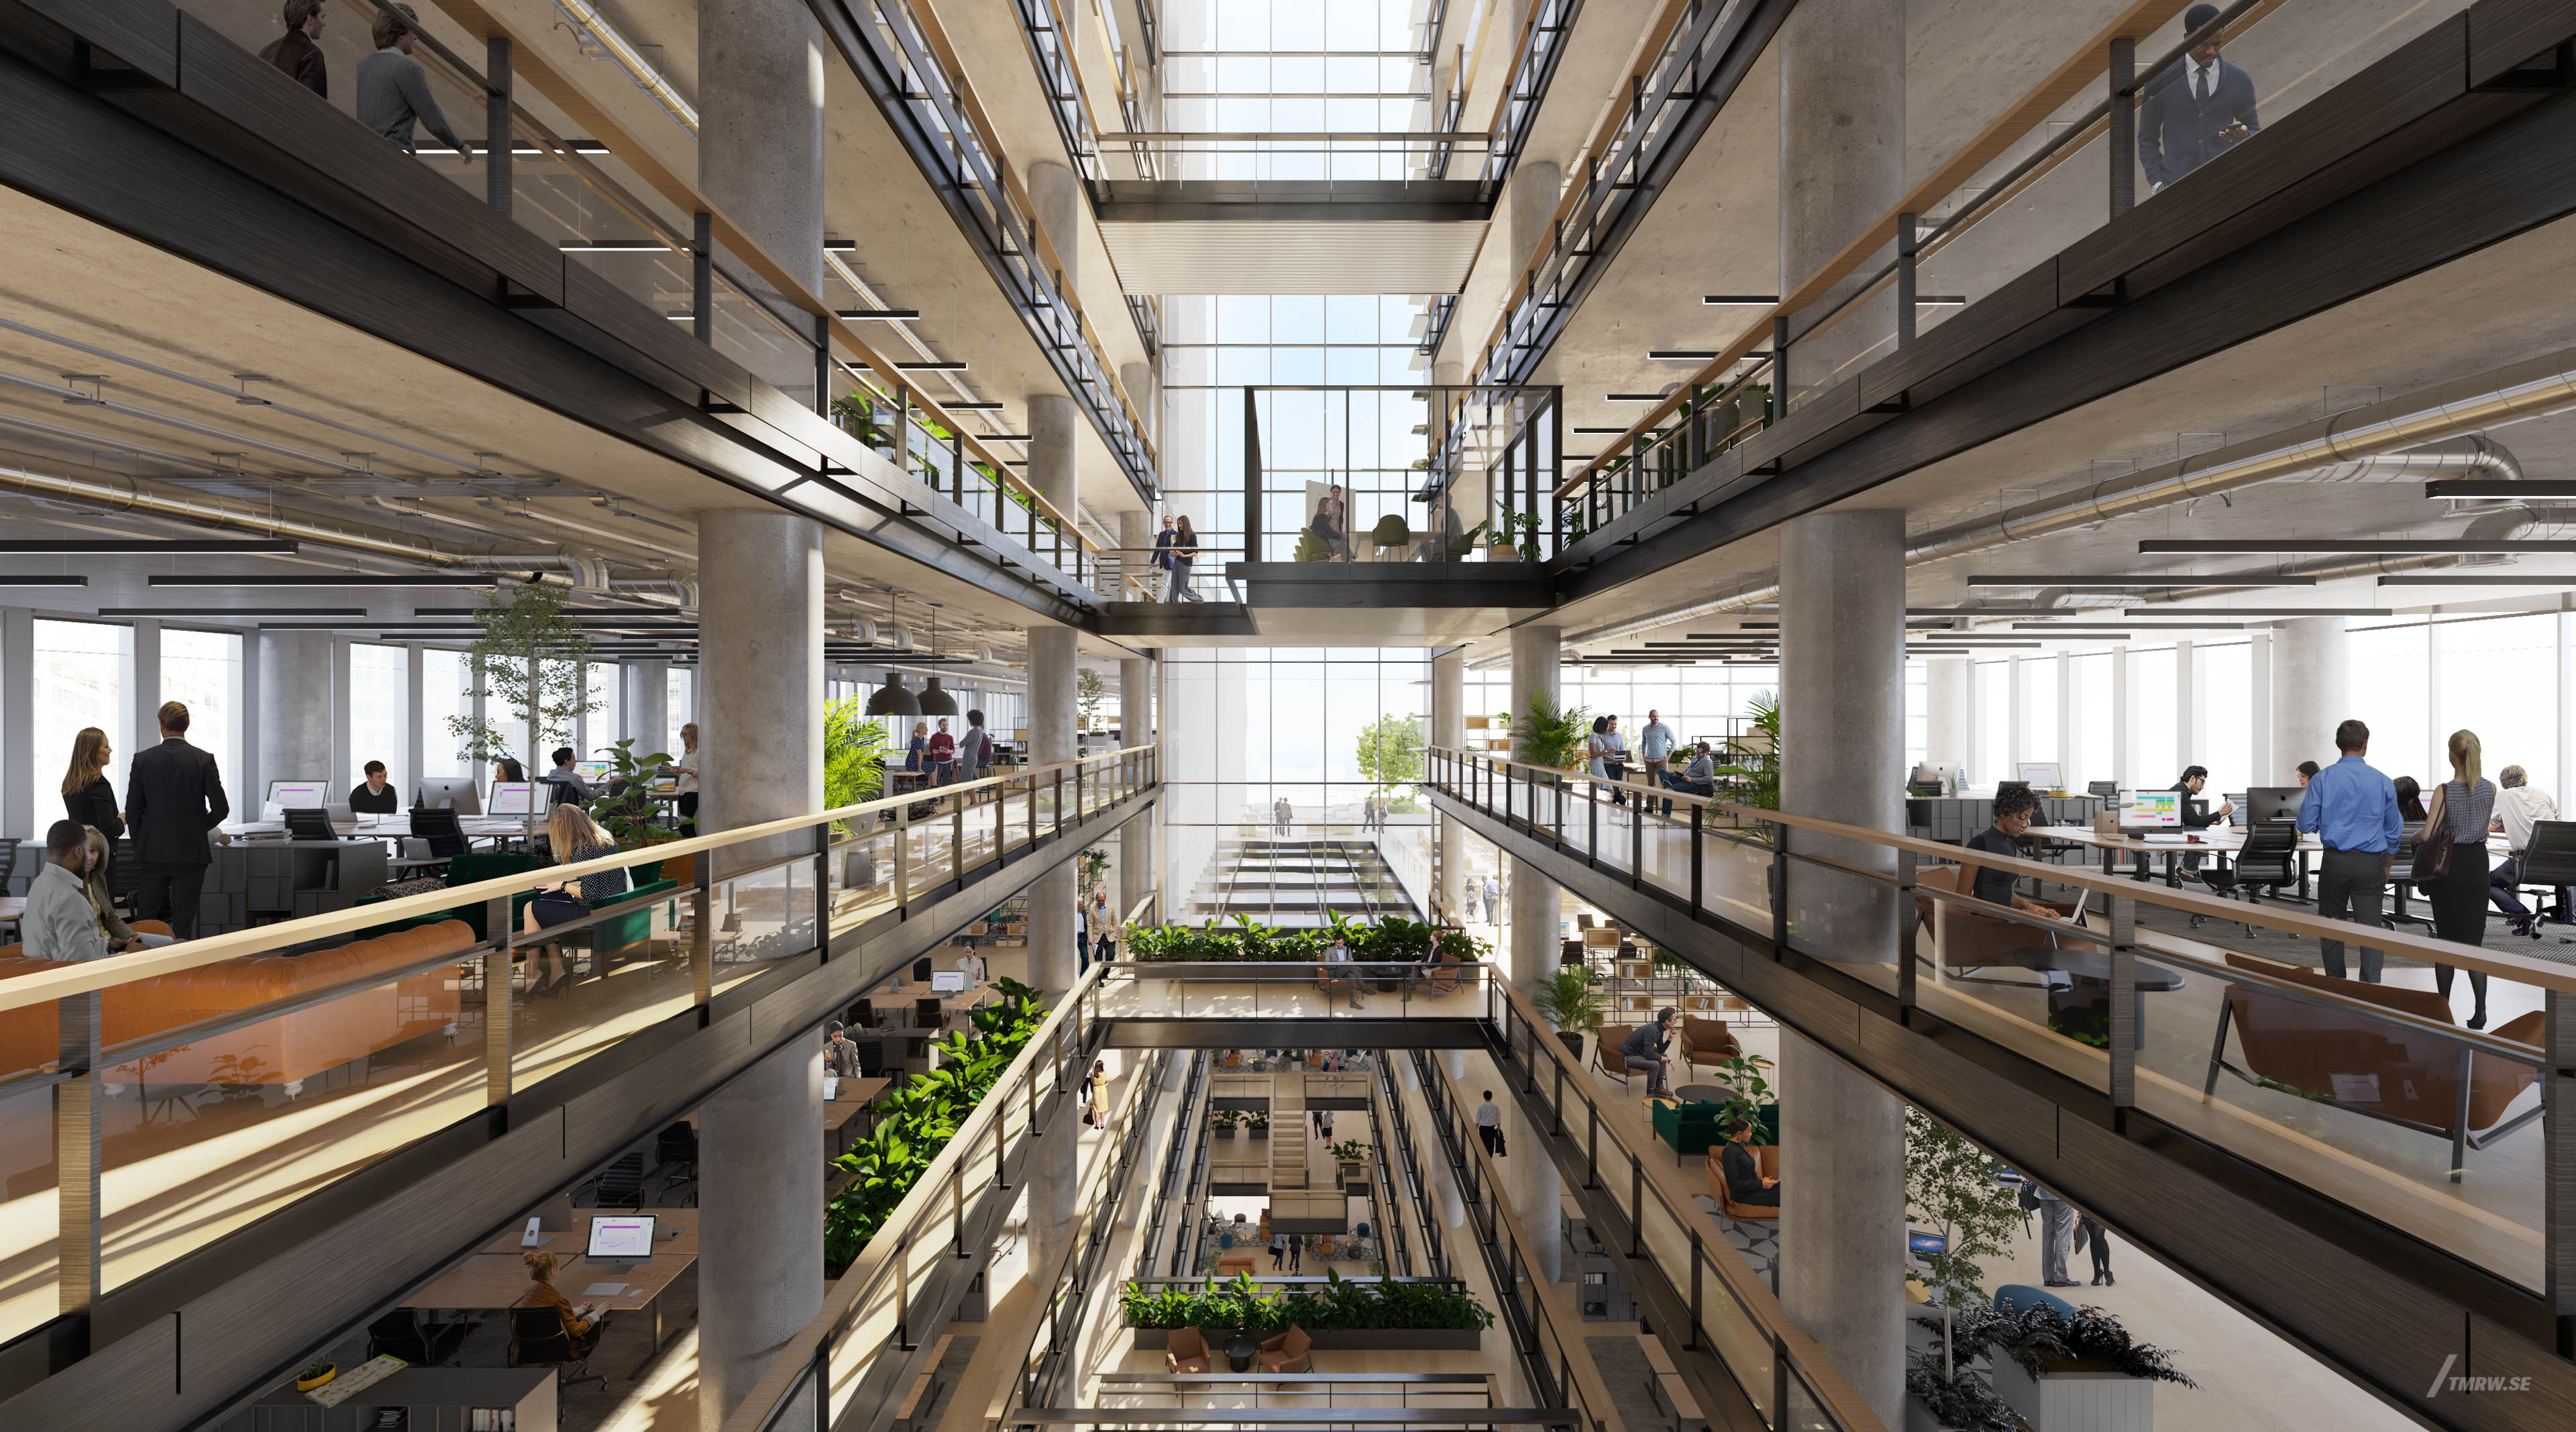 Architectural visualization of Southbank for SOM, an office interior during day light from a semi aerial view.